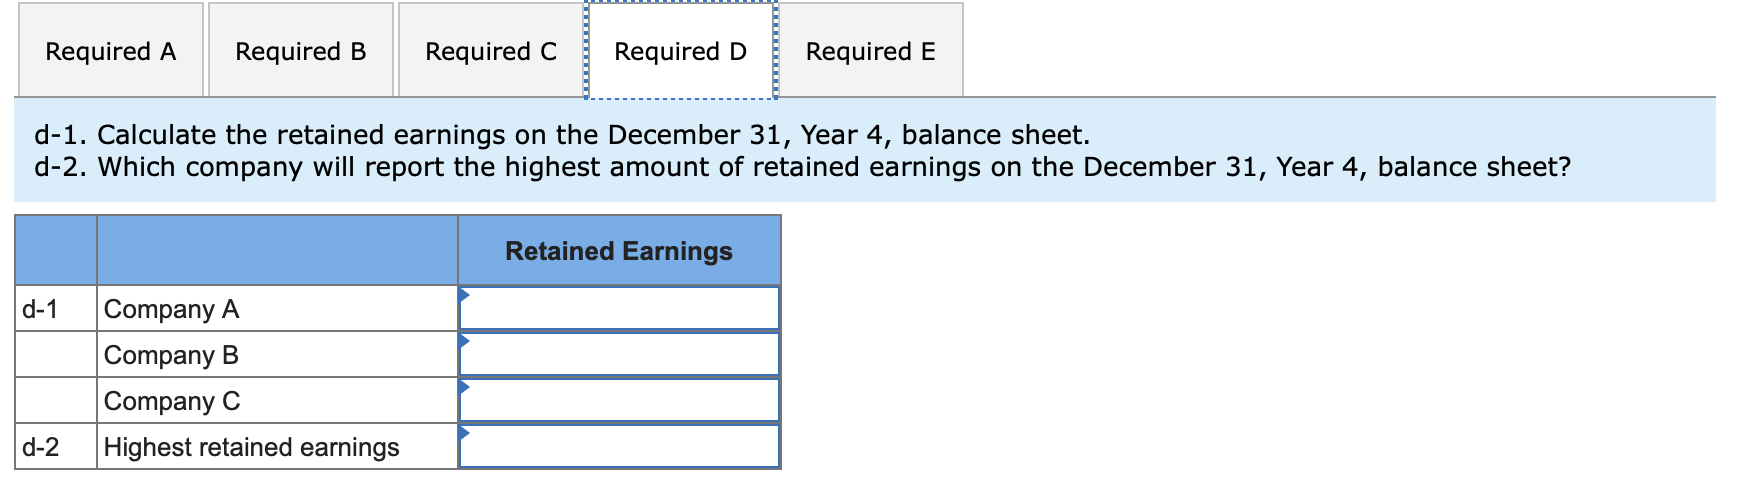 Required ARequired BRequired C.Required DRequired Ed-1. Calculate the retained earnings on the December 31, Year 4, bala